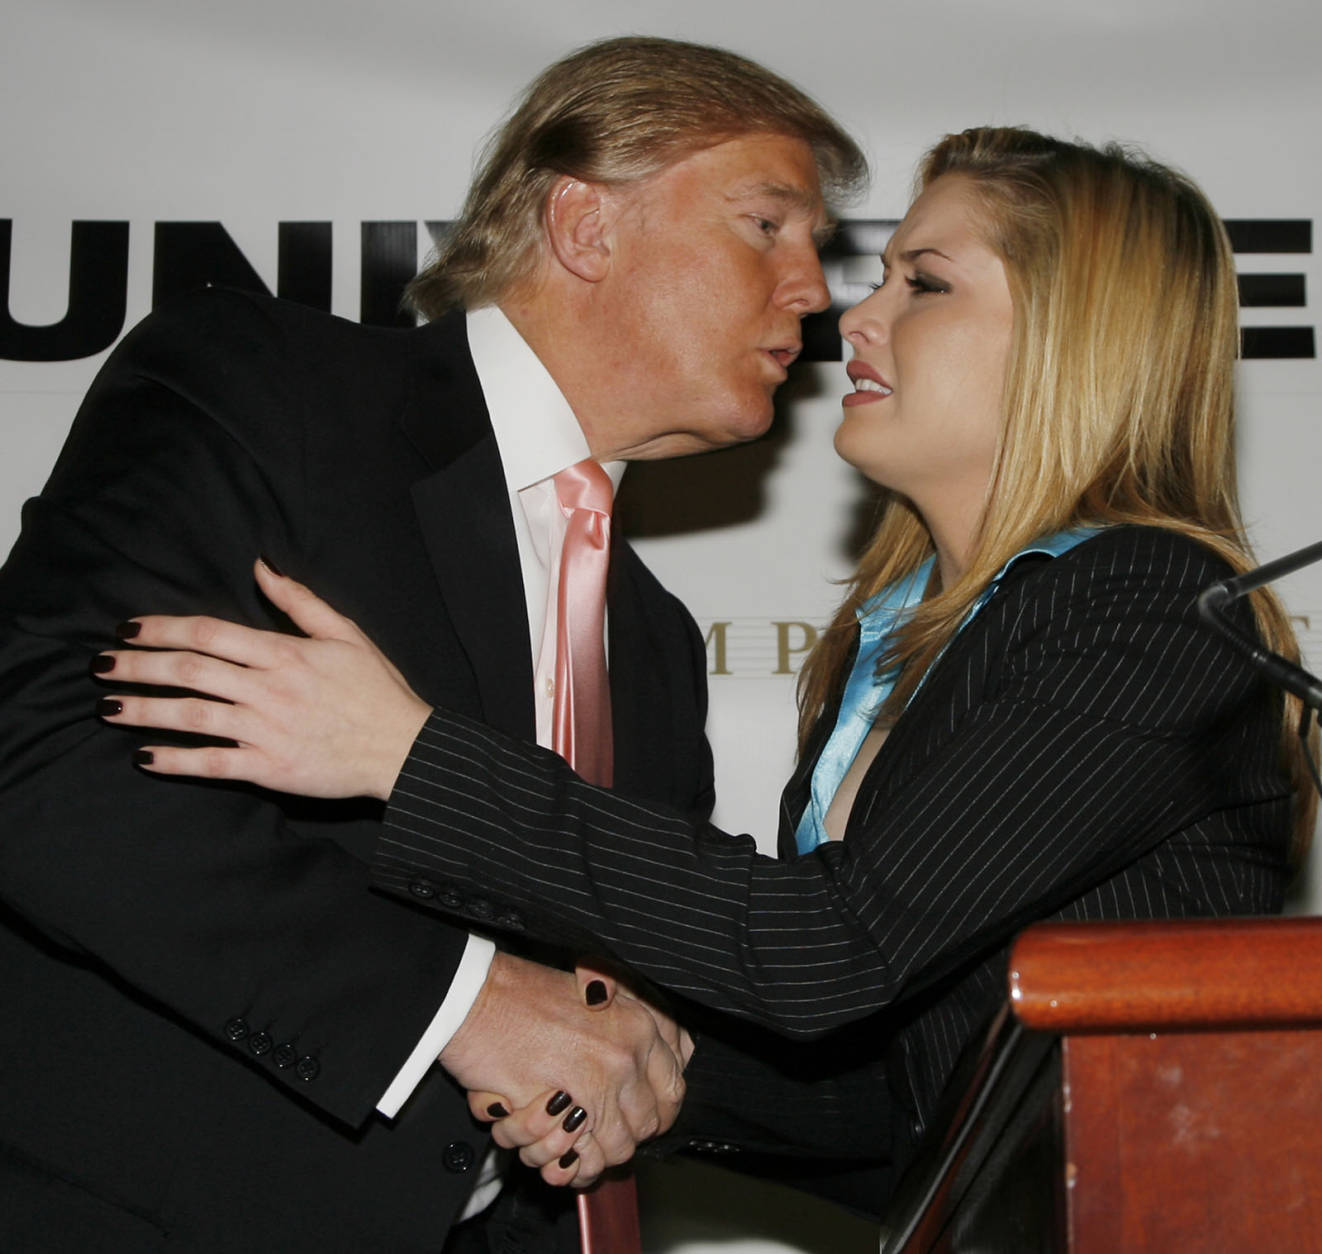 Miss USA 2006 Tara Conner, is kissed by Donald Trump after a news conference on Tuesday Dec. 19, 2006 in New York City. Conner, who had come under criticism amid rumors she had been frequenting bars while underage, will be allowed to keep her title, Donald Trump announced at the news conference.  (AP Photo/Rick Maiman)